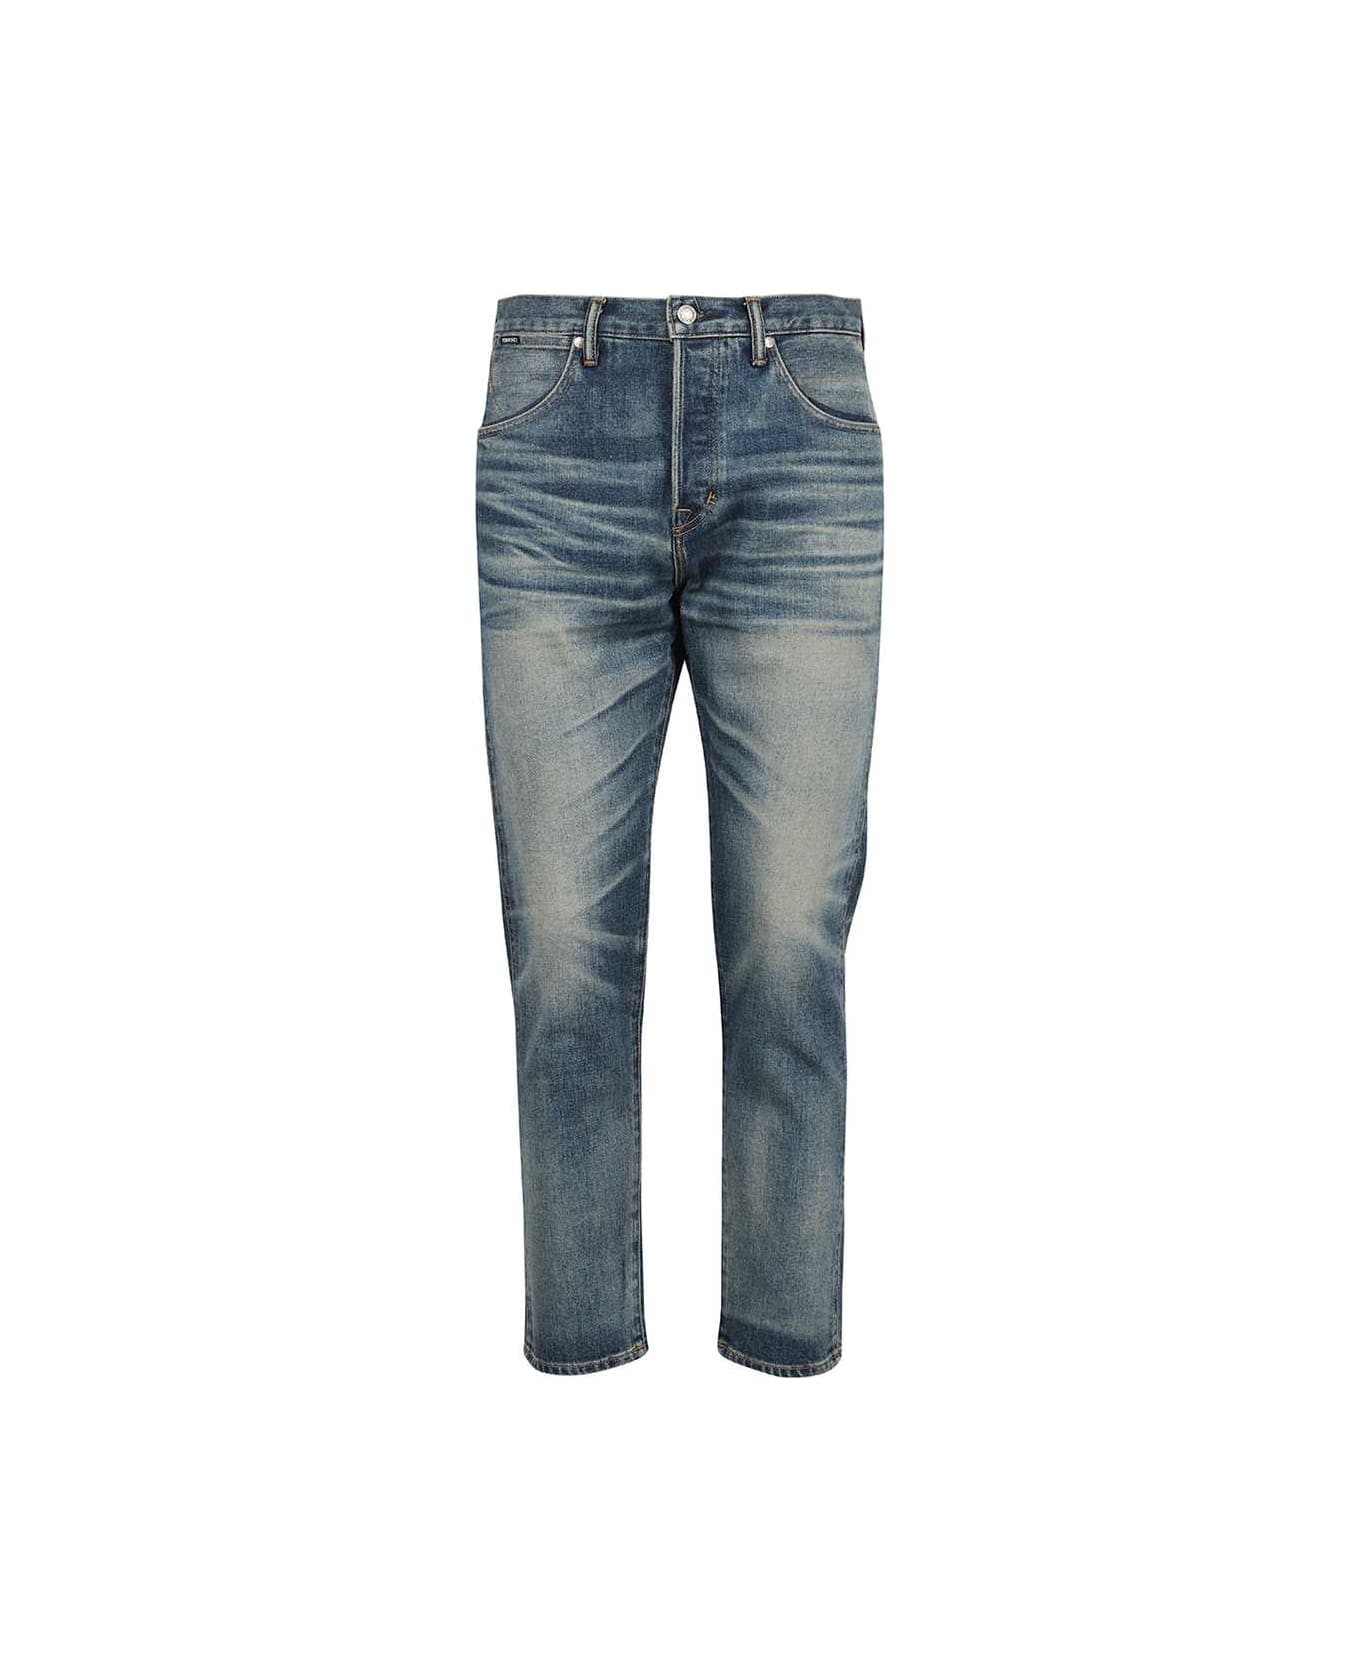 Tom Ford Tapered Fit Jeans - Denim